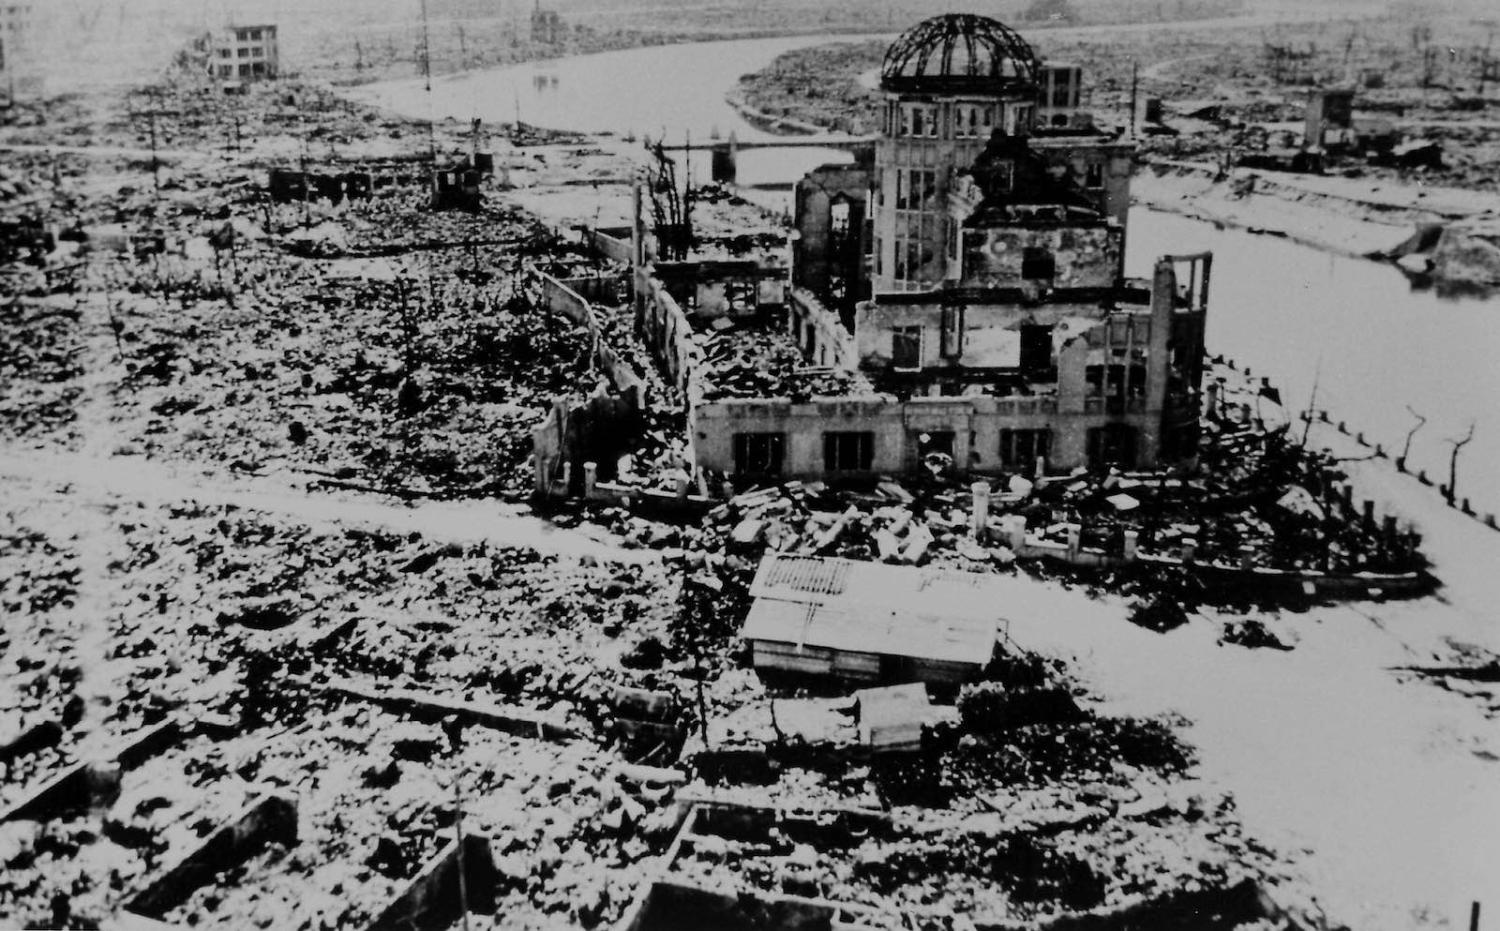 Hiroshima, Japan, after the atomic bomb of 6 August 1945 (Photo: Roger Viollet/Getty)